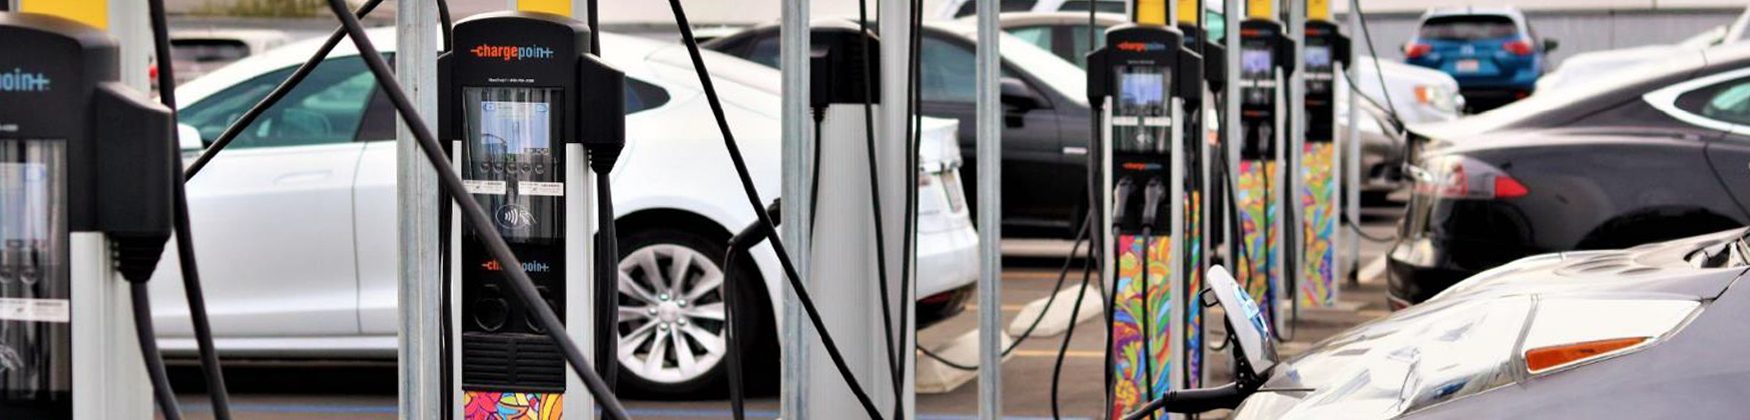 Electric Vehicle Rebates And Infrastructure CSE